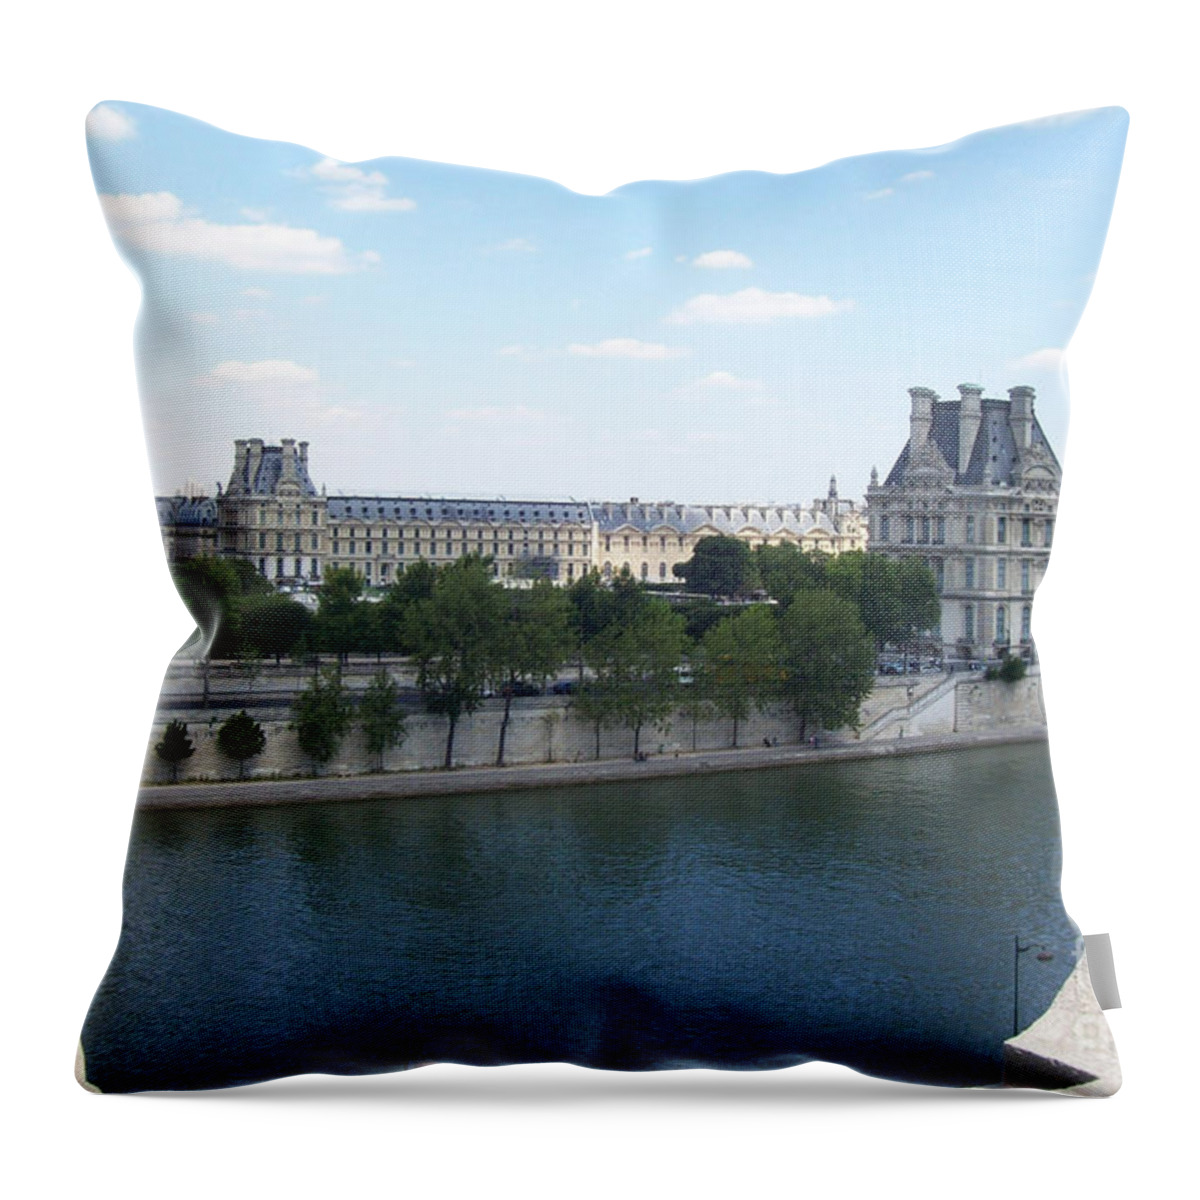 Human Throw Pillow featuring the photograph The Louvre by Mary Mikawoz